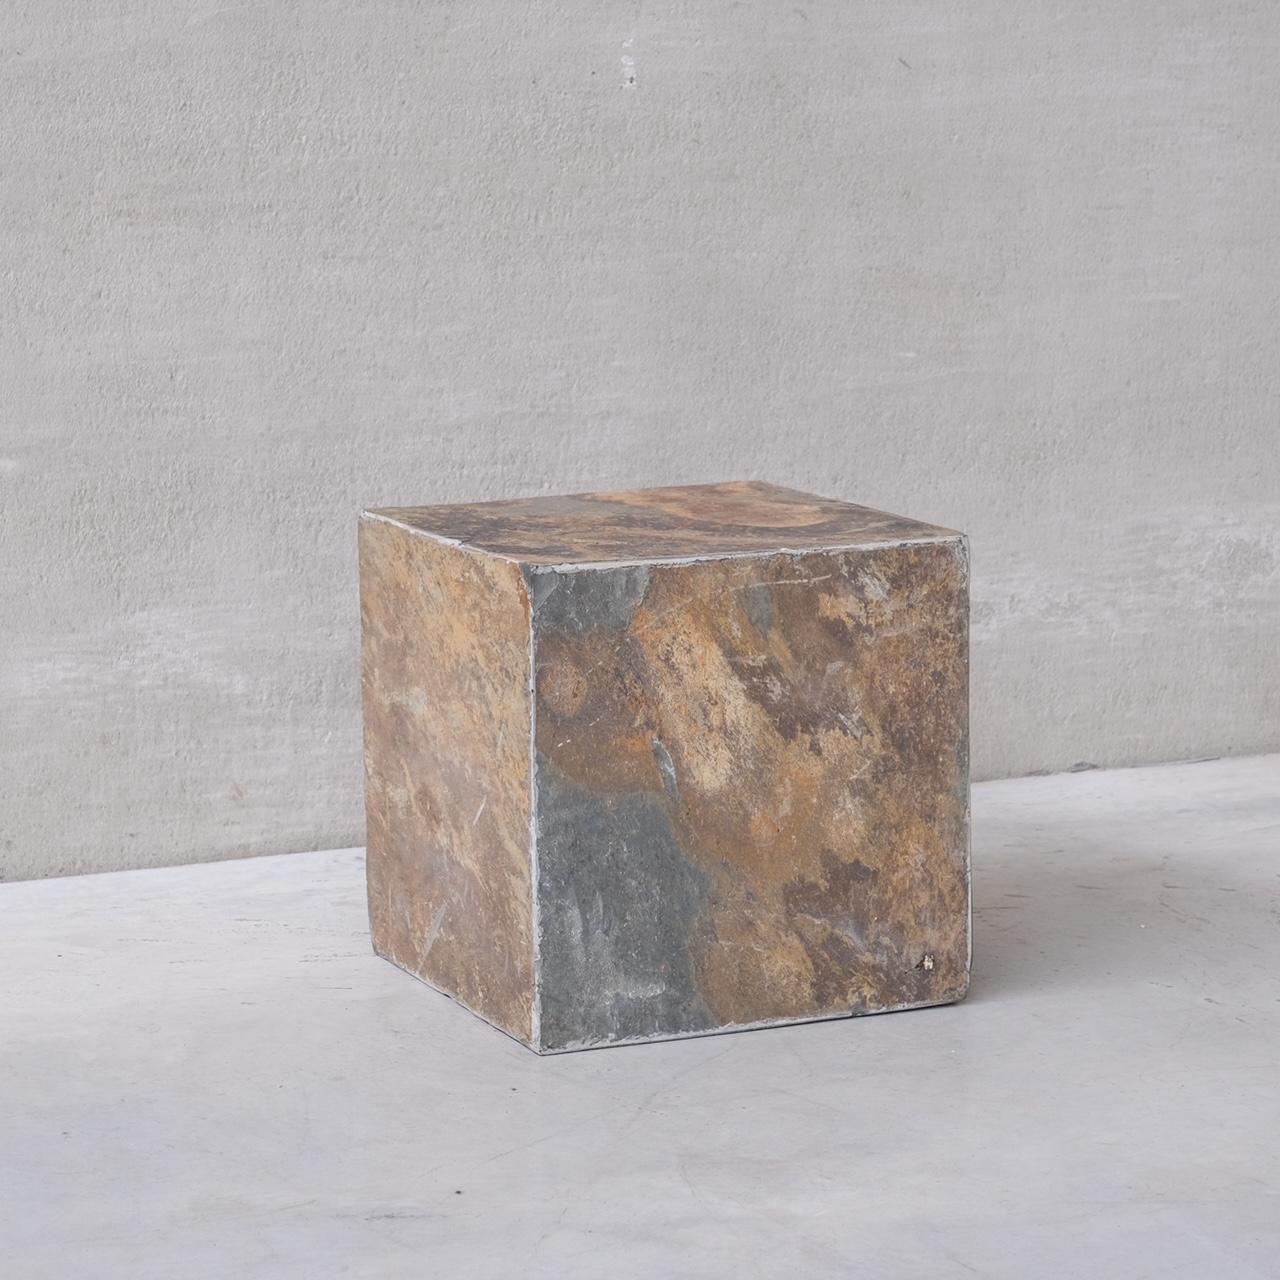 An unusual stone cube.

Belgium, circa 1970s.

Hollow but the cube has a stone face on each side including the base.

Ideal as an over sized side table or perhaps a display for art or a retail unit.

Location: Belgium Gallery.

Dimensions: